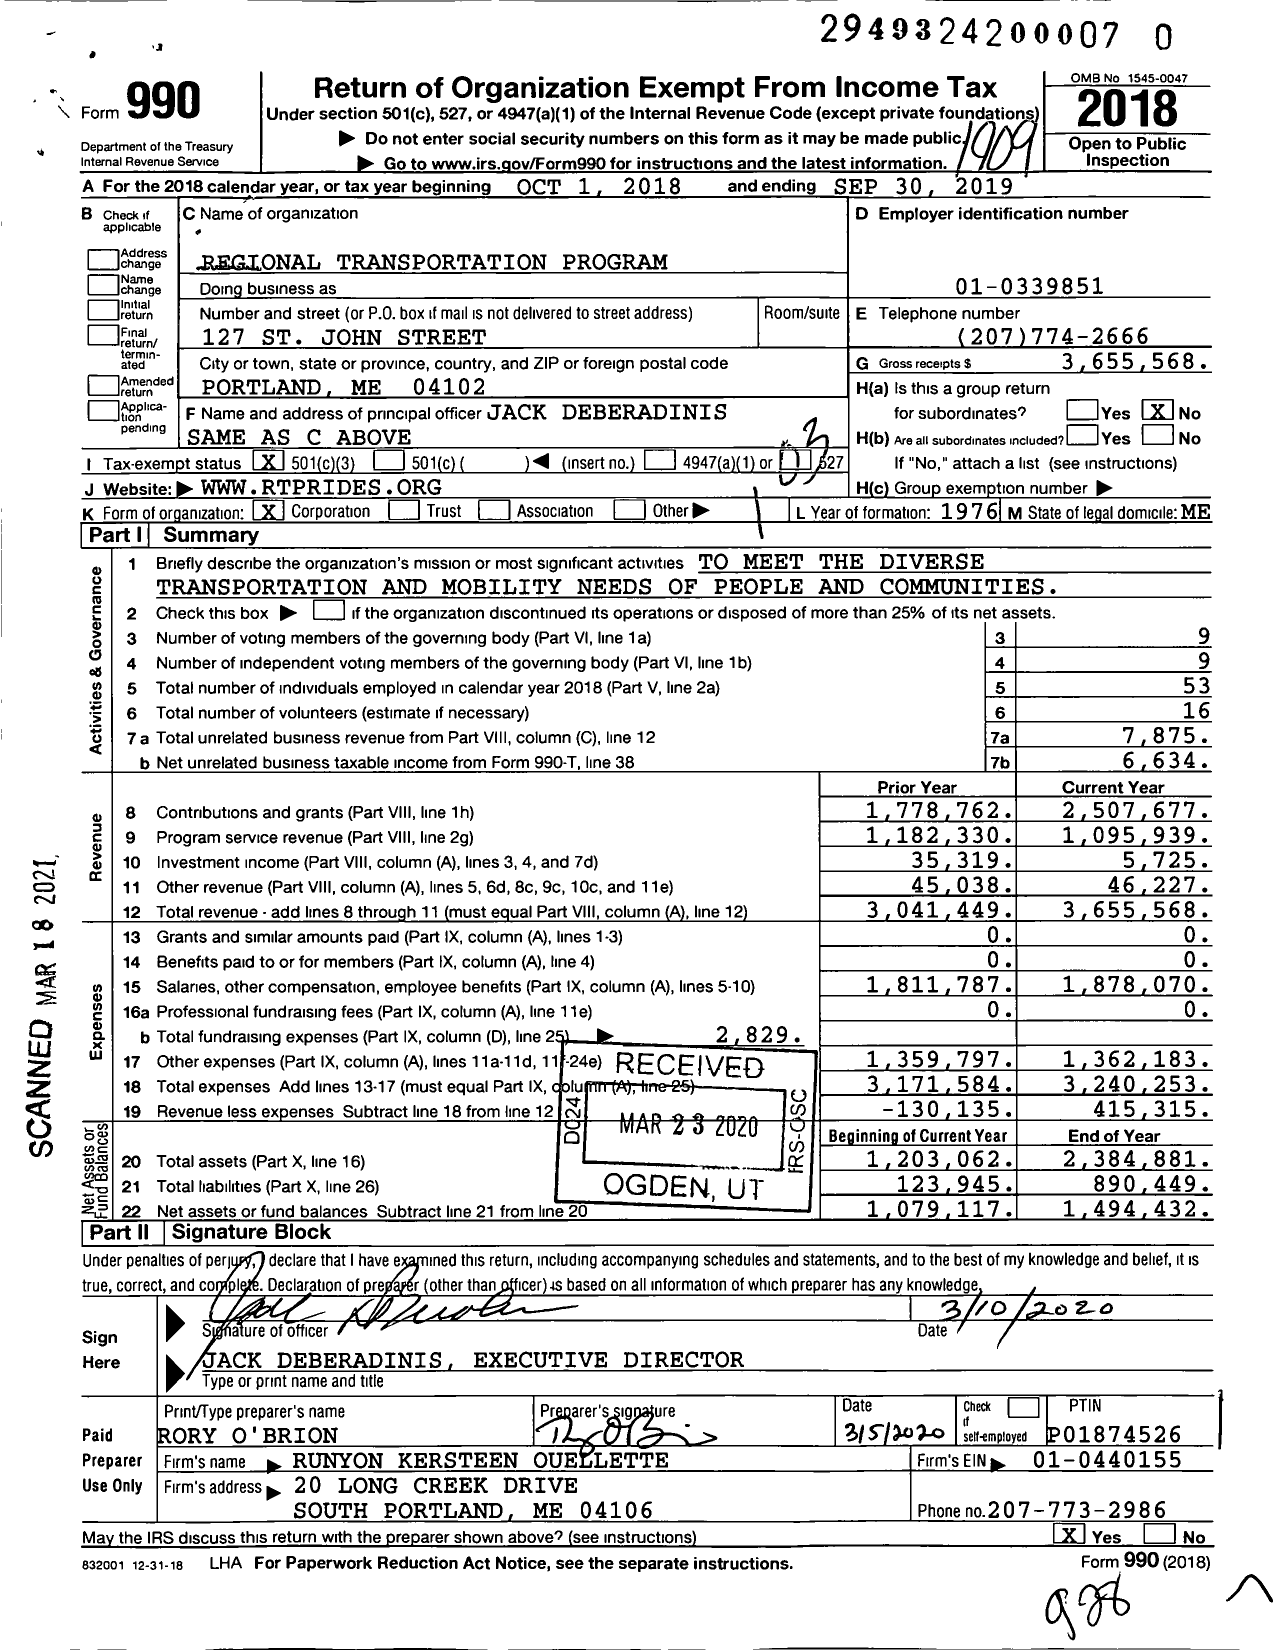 Image of first page of 2018 Form 990 for Regional Transportation Program